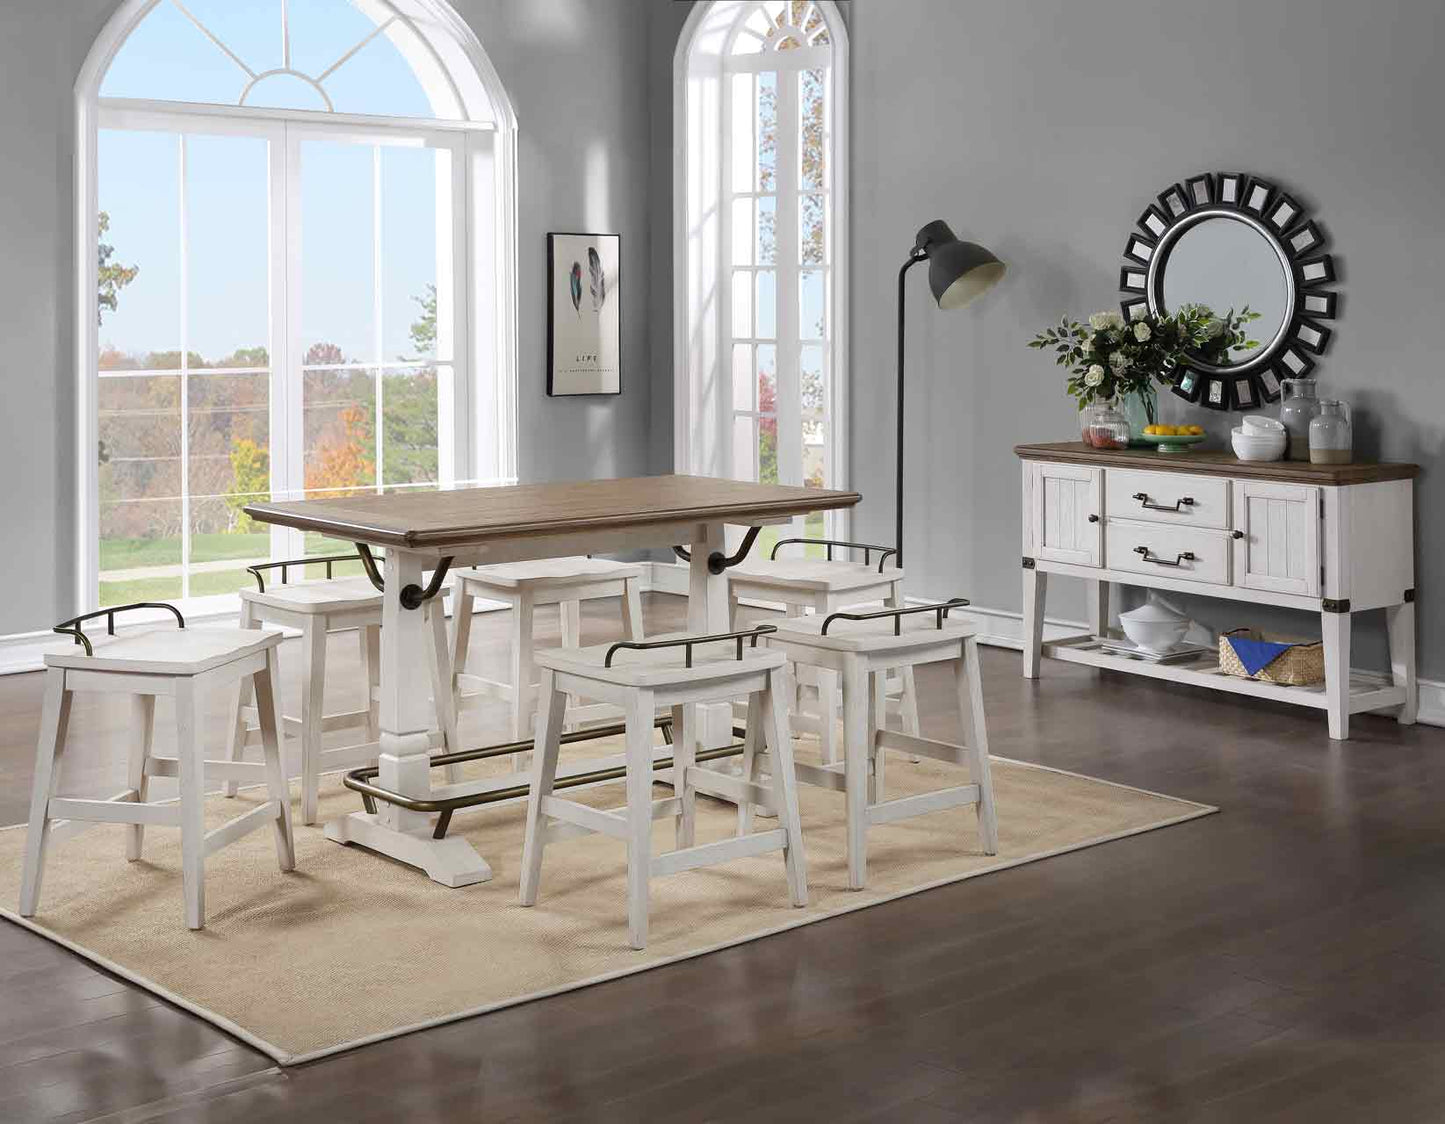 Pendleton 5-Piece Counter Dining Set
(Counter Table & 4 Counter Stools)